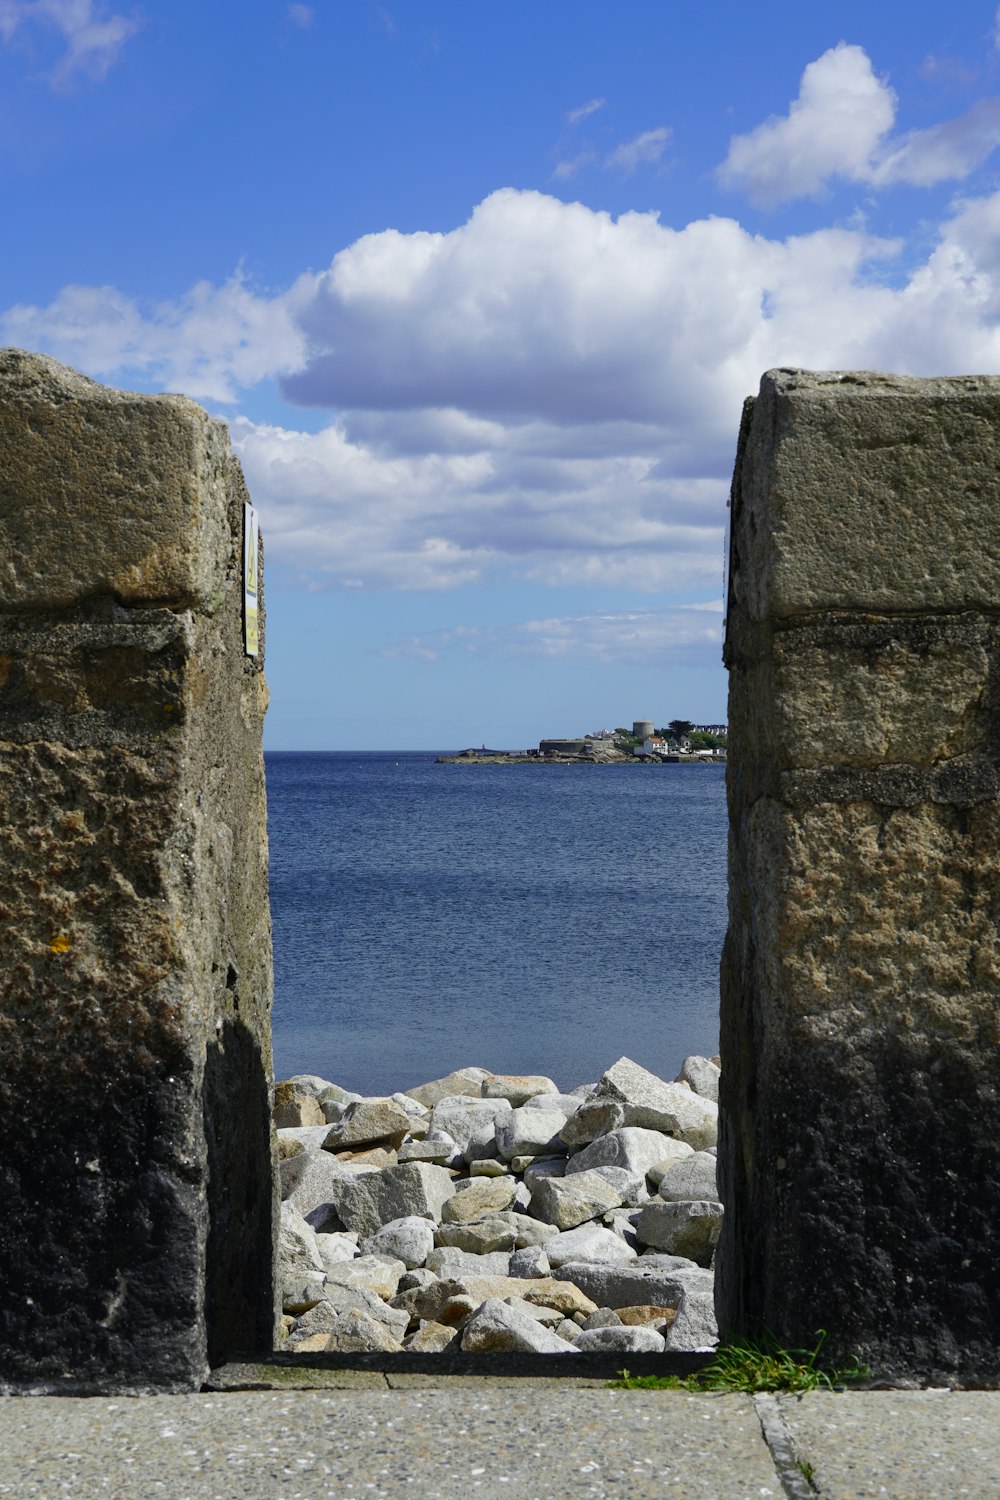 a view of a body of water through two stone doors